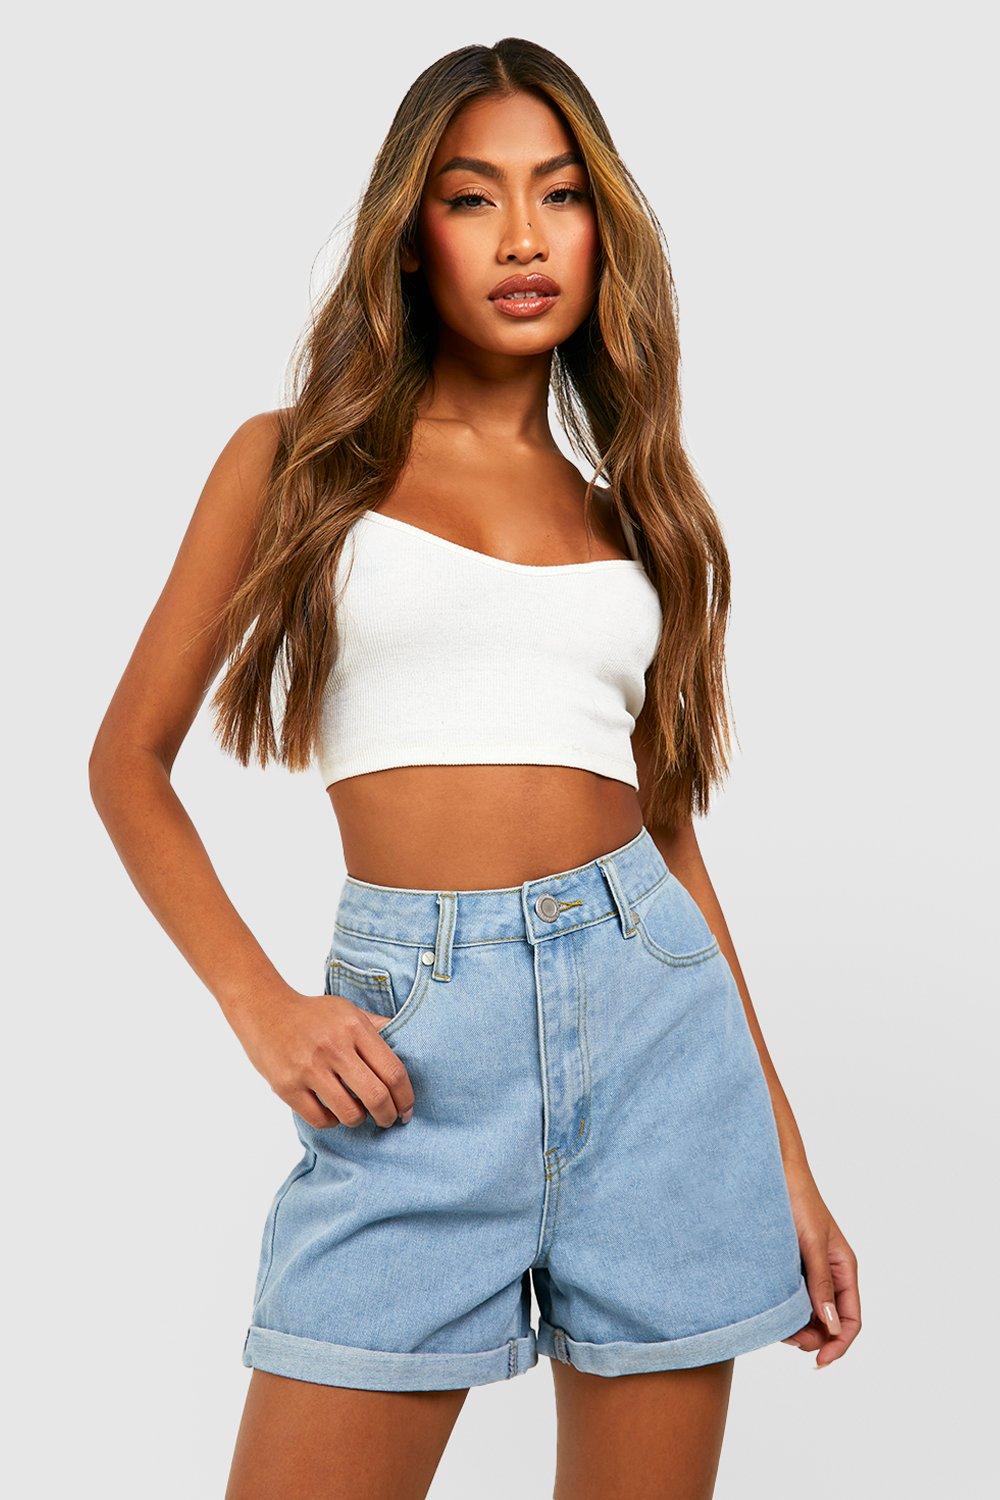 Ripped Cotton Shorts Rolled Hem Sexy Jean Womens High Waisted